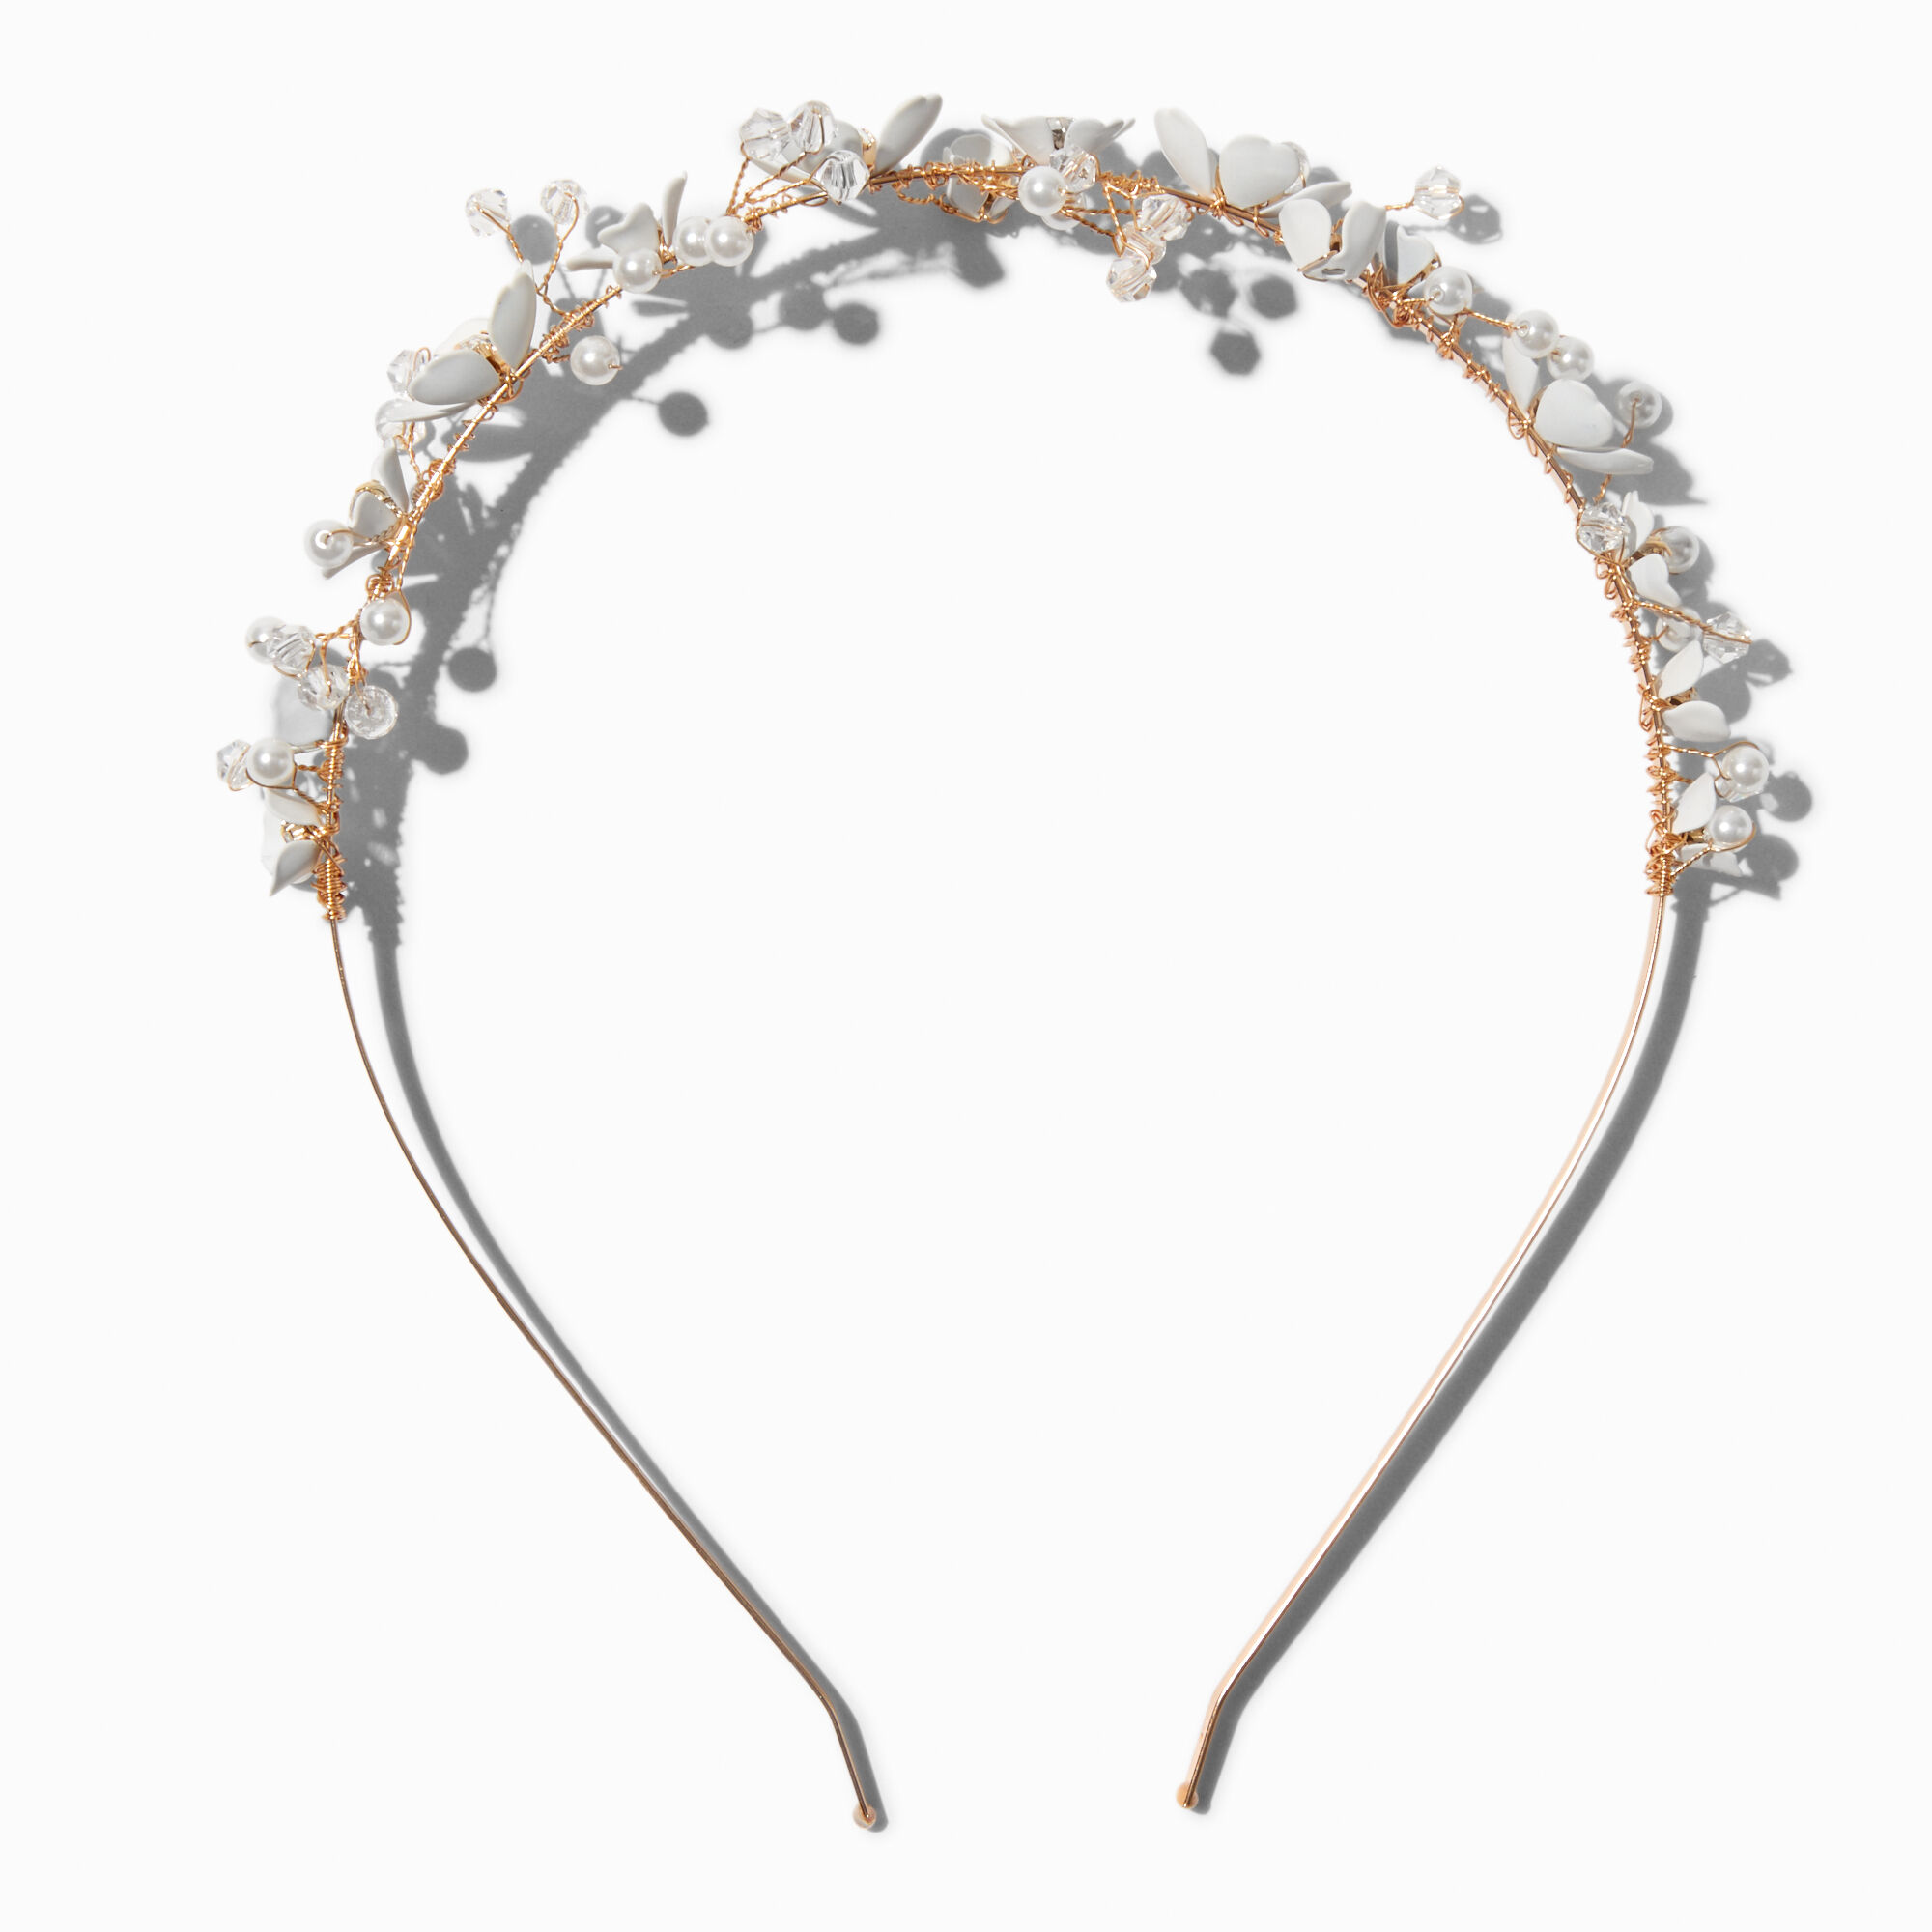 View Claires Floral Pearl GoldTone Headband White information